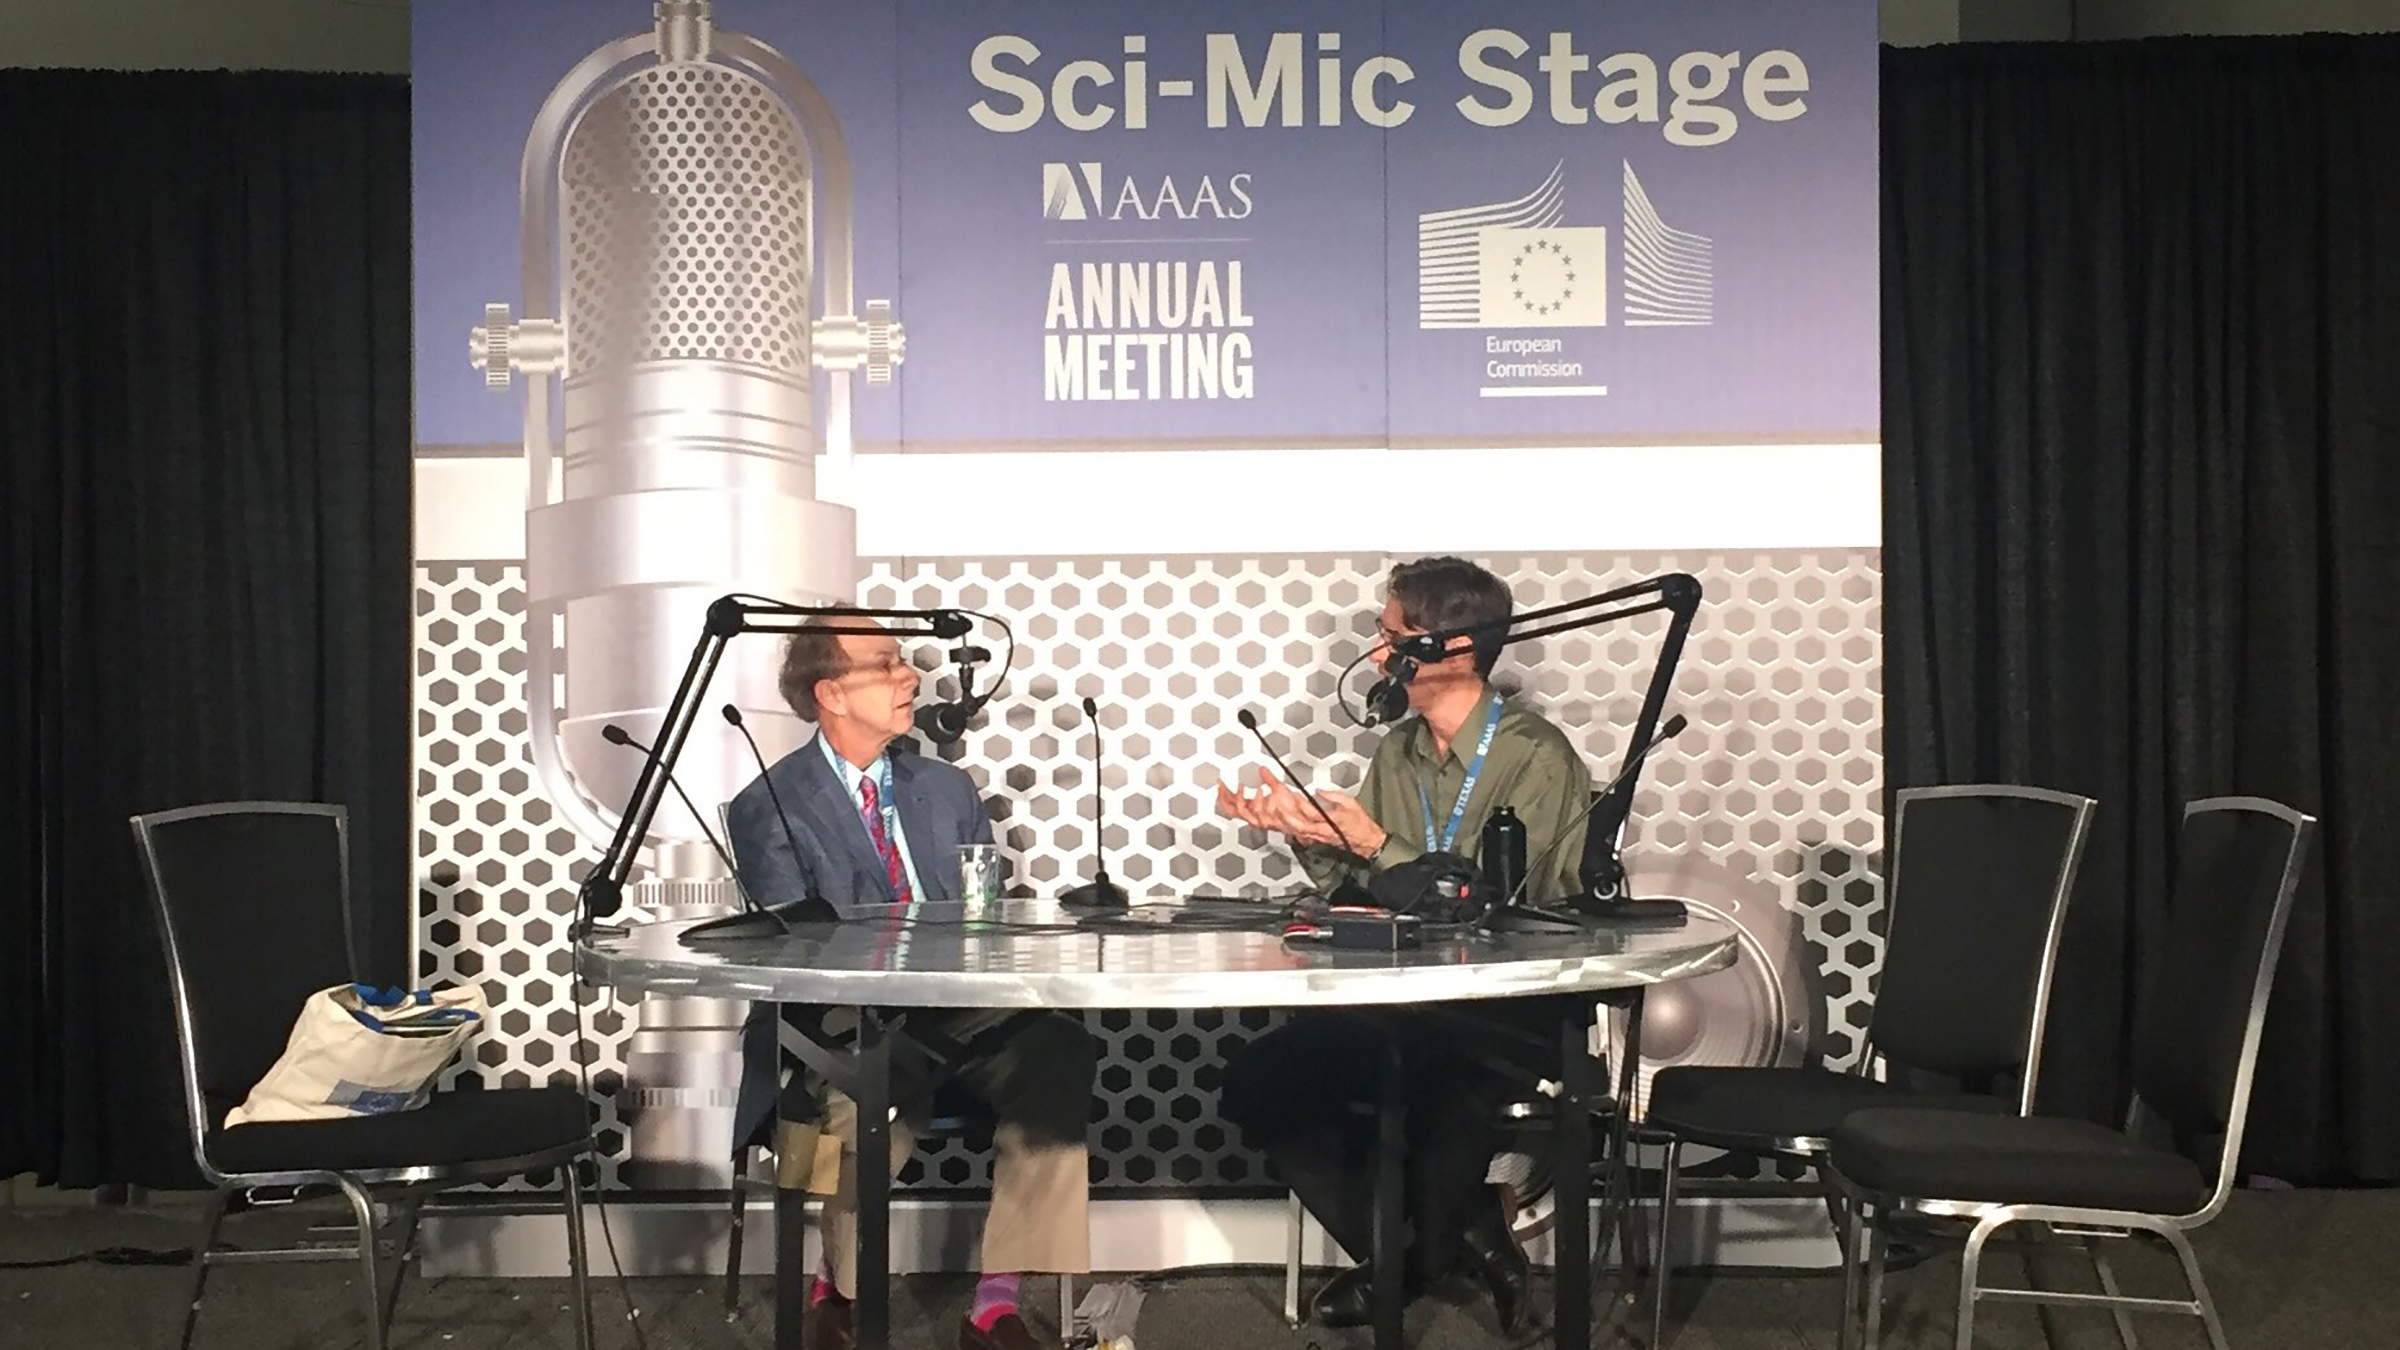 Two men sit at a desk with microphones, a banner behind them reads "Sci-Mic Stage"